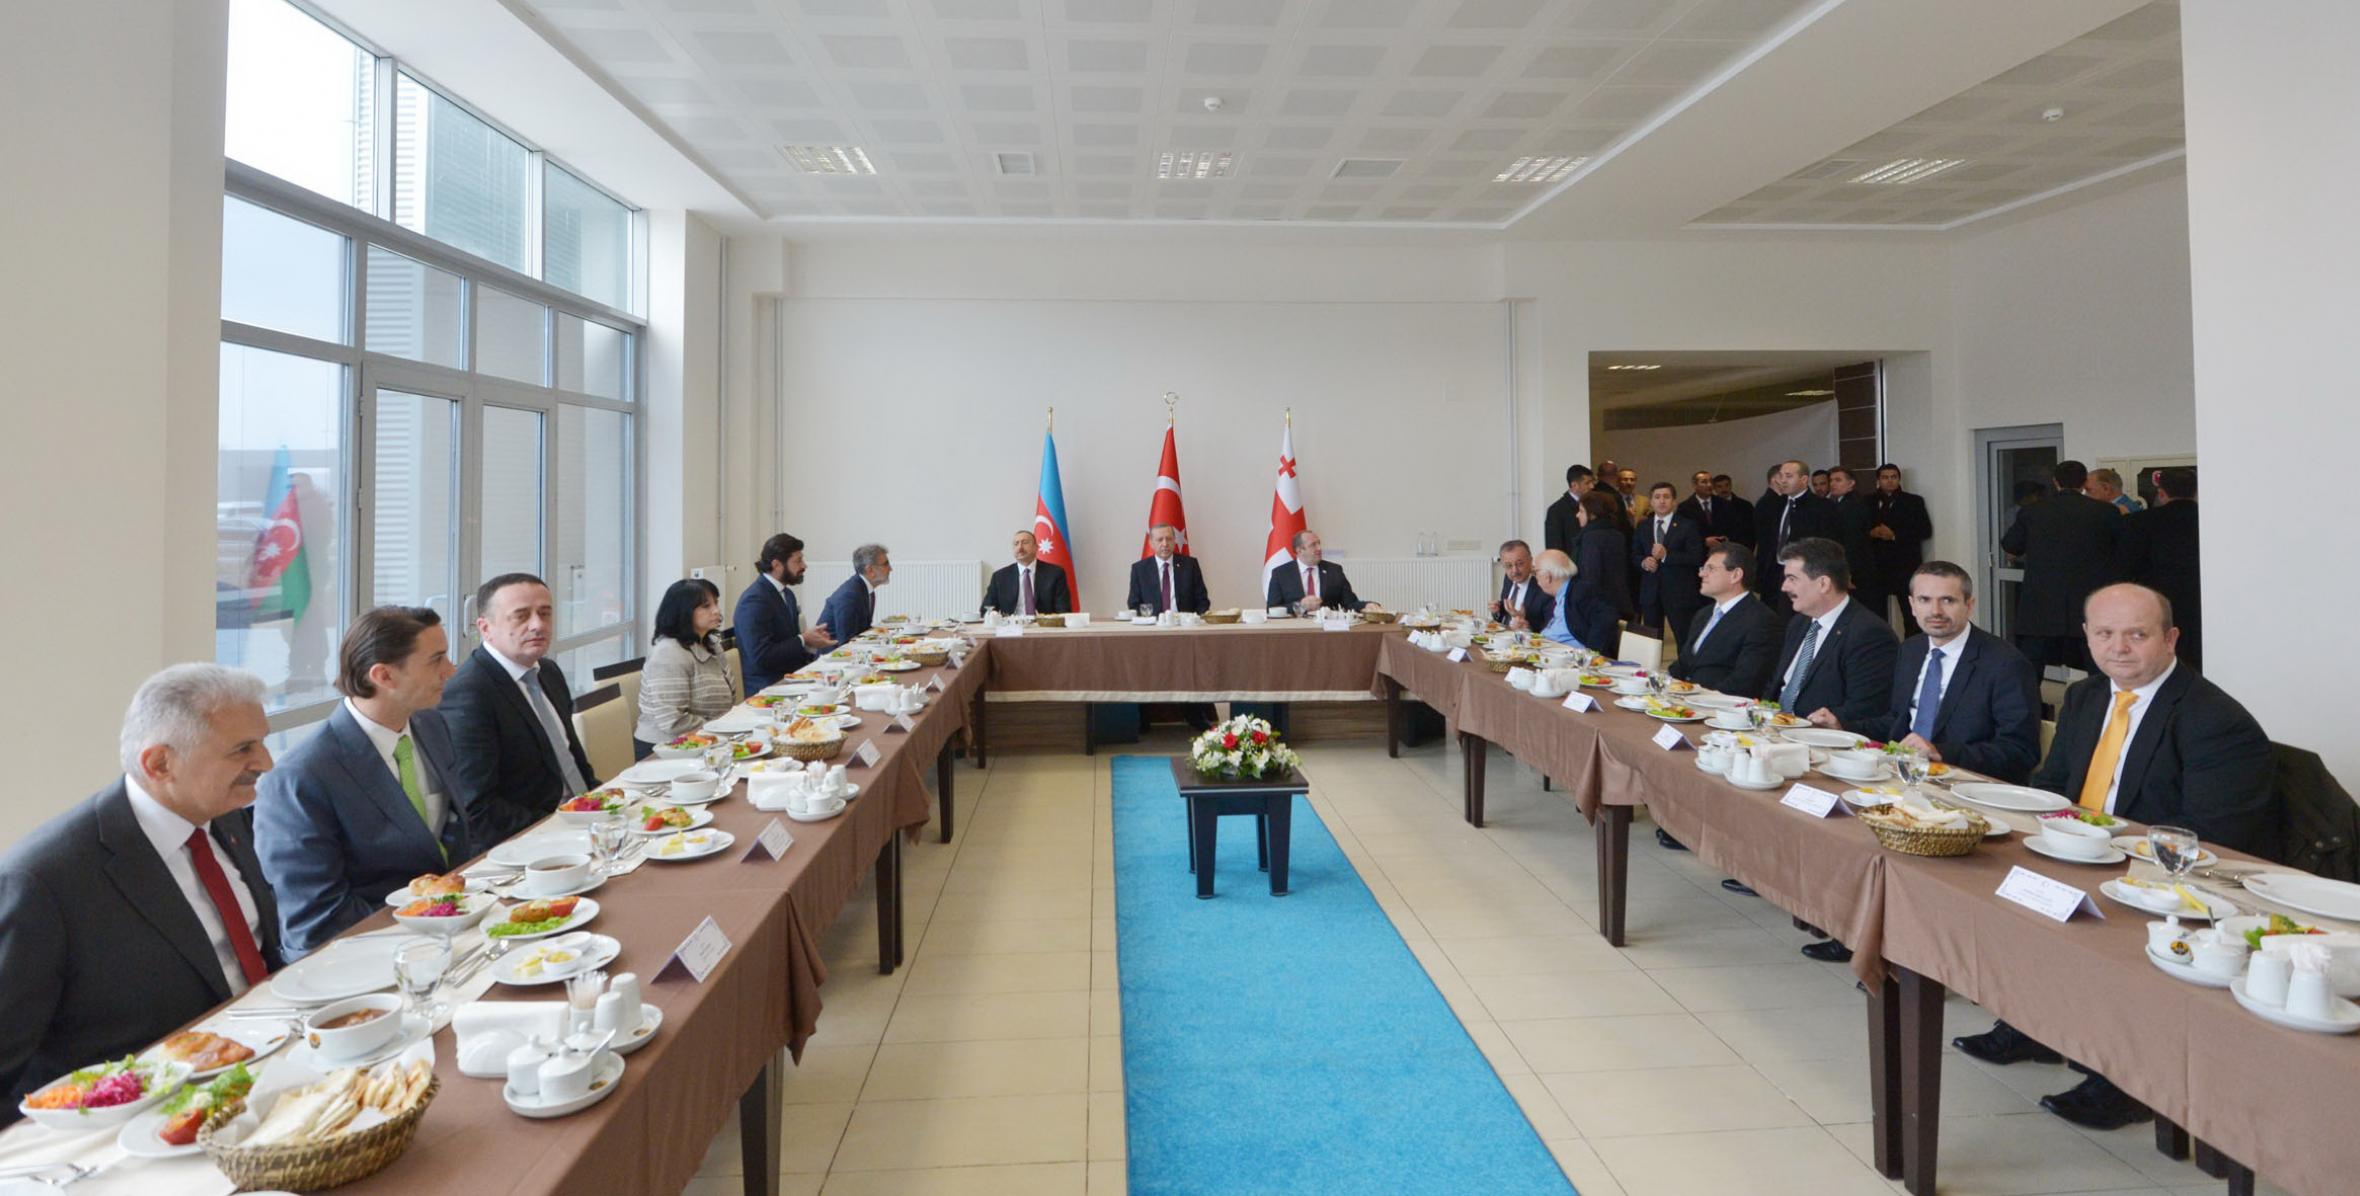 Dinner reception was hosted on behalf of the Governor of Kars province in honor of the heads of state